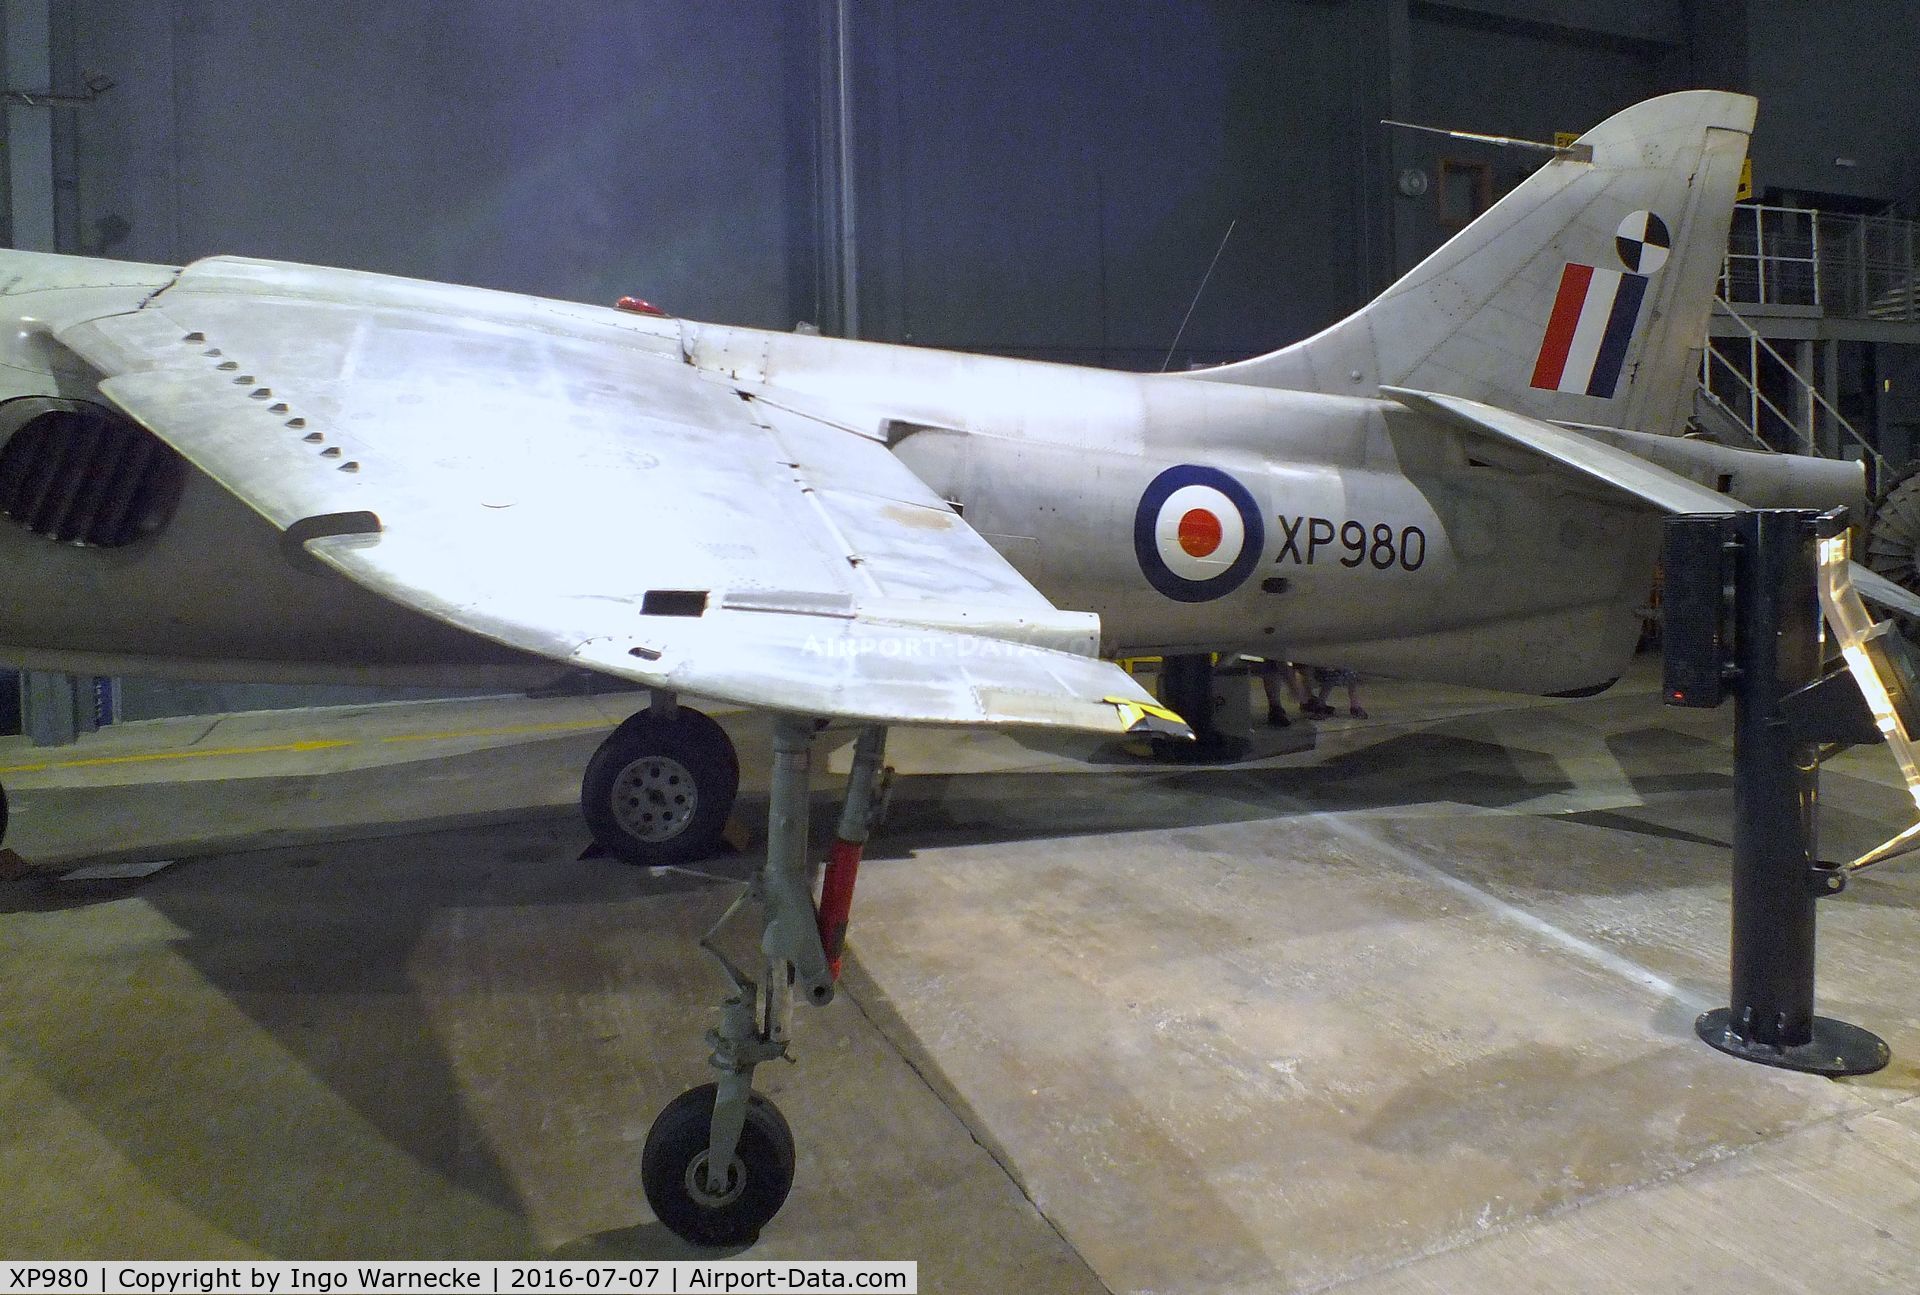 XP980, Hawker Siddeley P.1127 C/N P-05, Hawker P.1127 5th prototype, displayed with Harrier GR1 wings, at the FAA Museum, Yeovilton